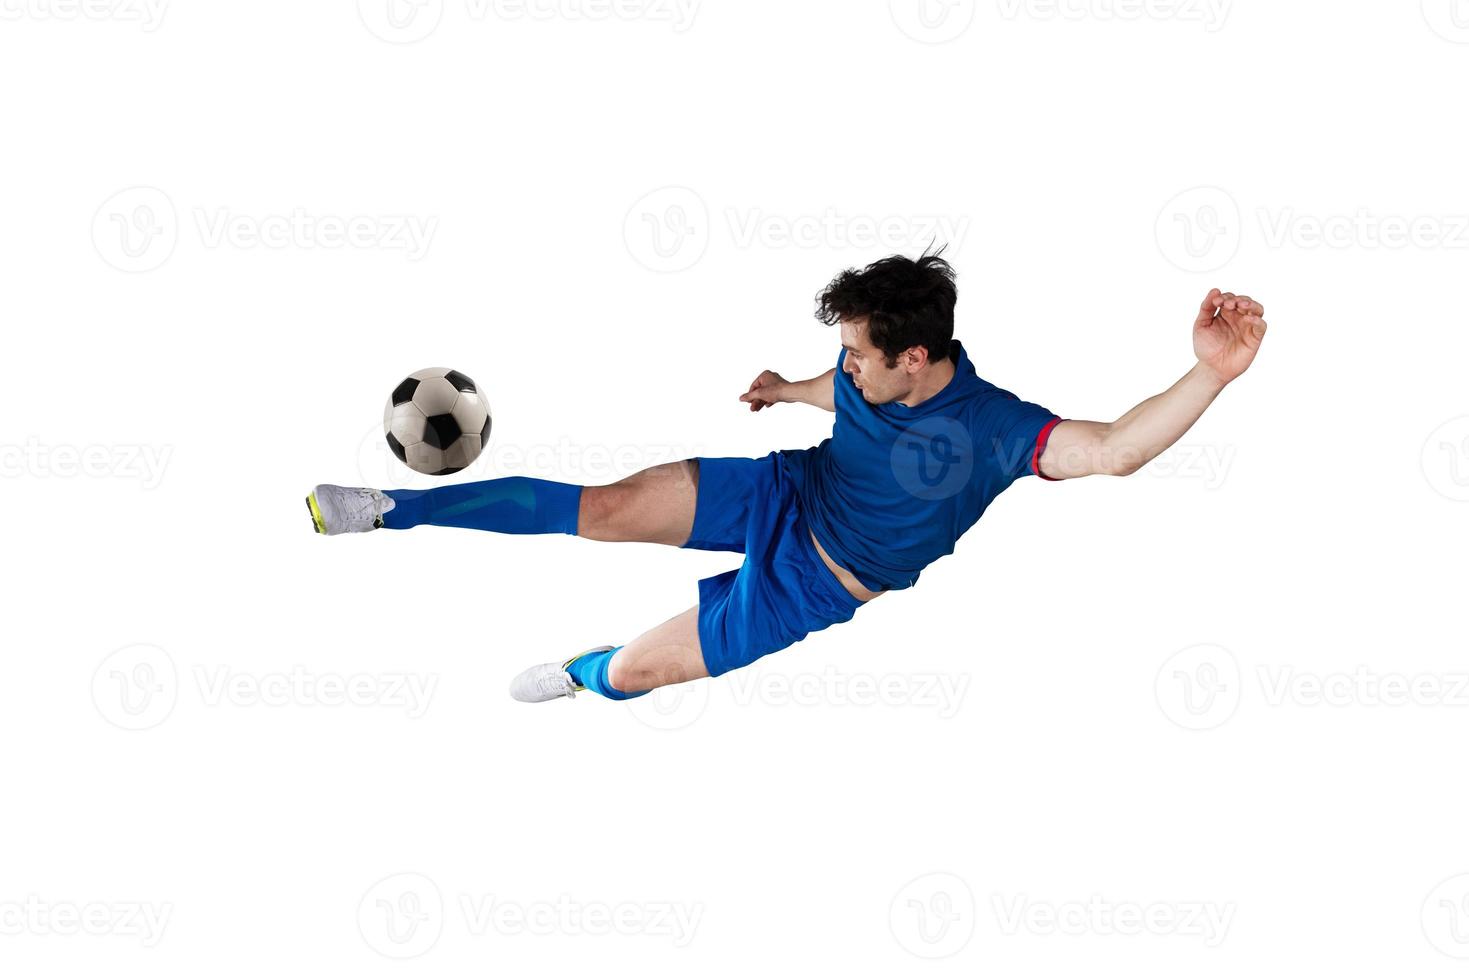 Football scene at night match with player kicking the ball with power. Isolated on white background photo